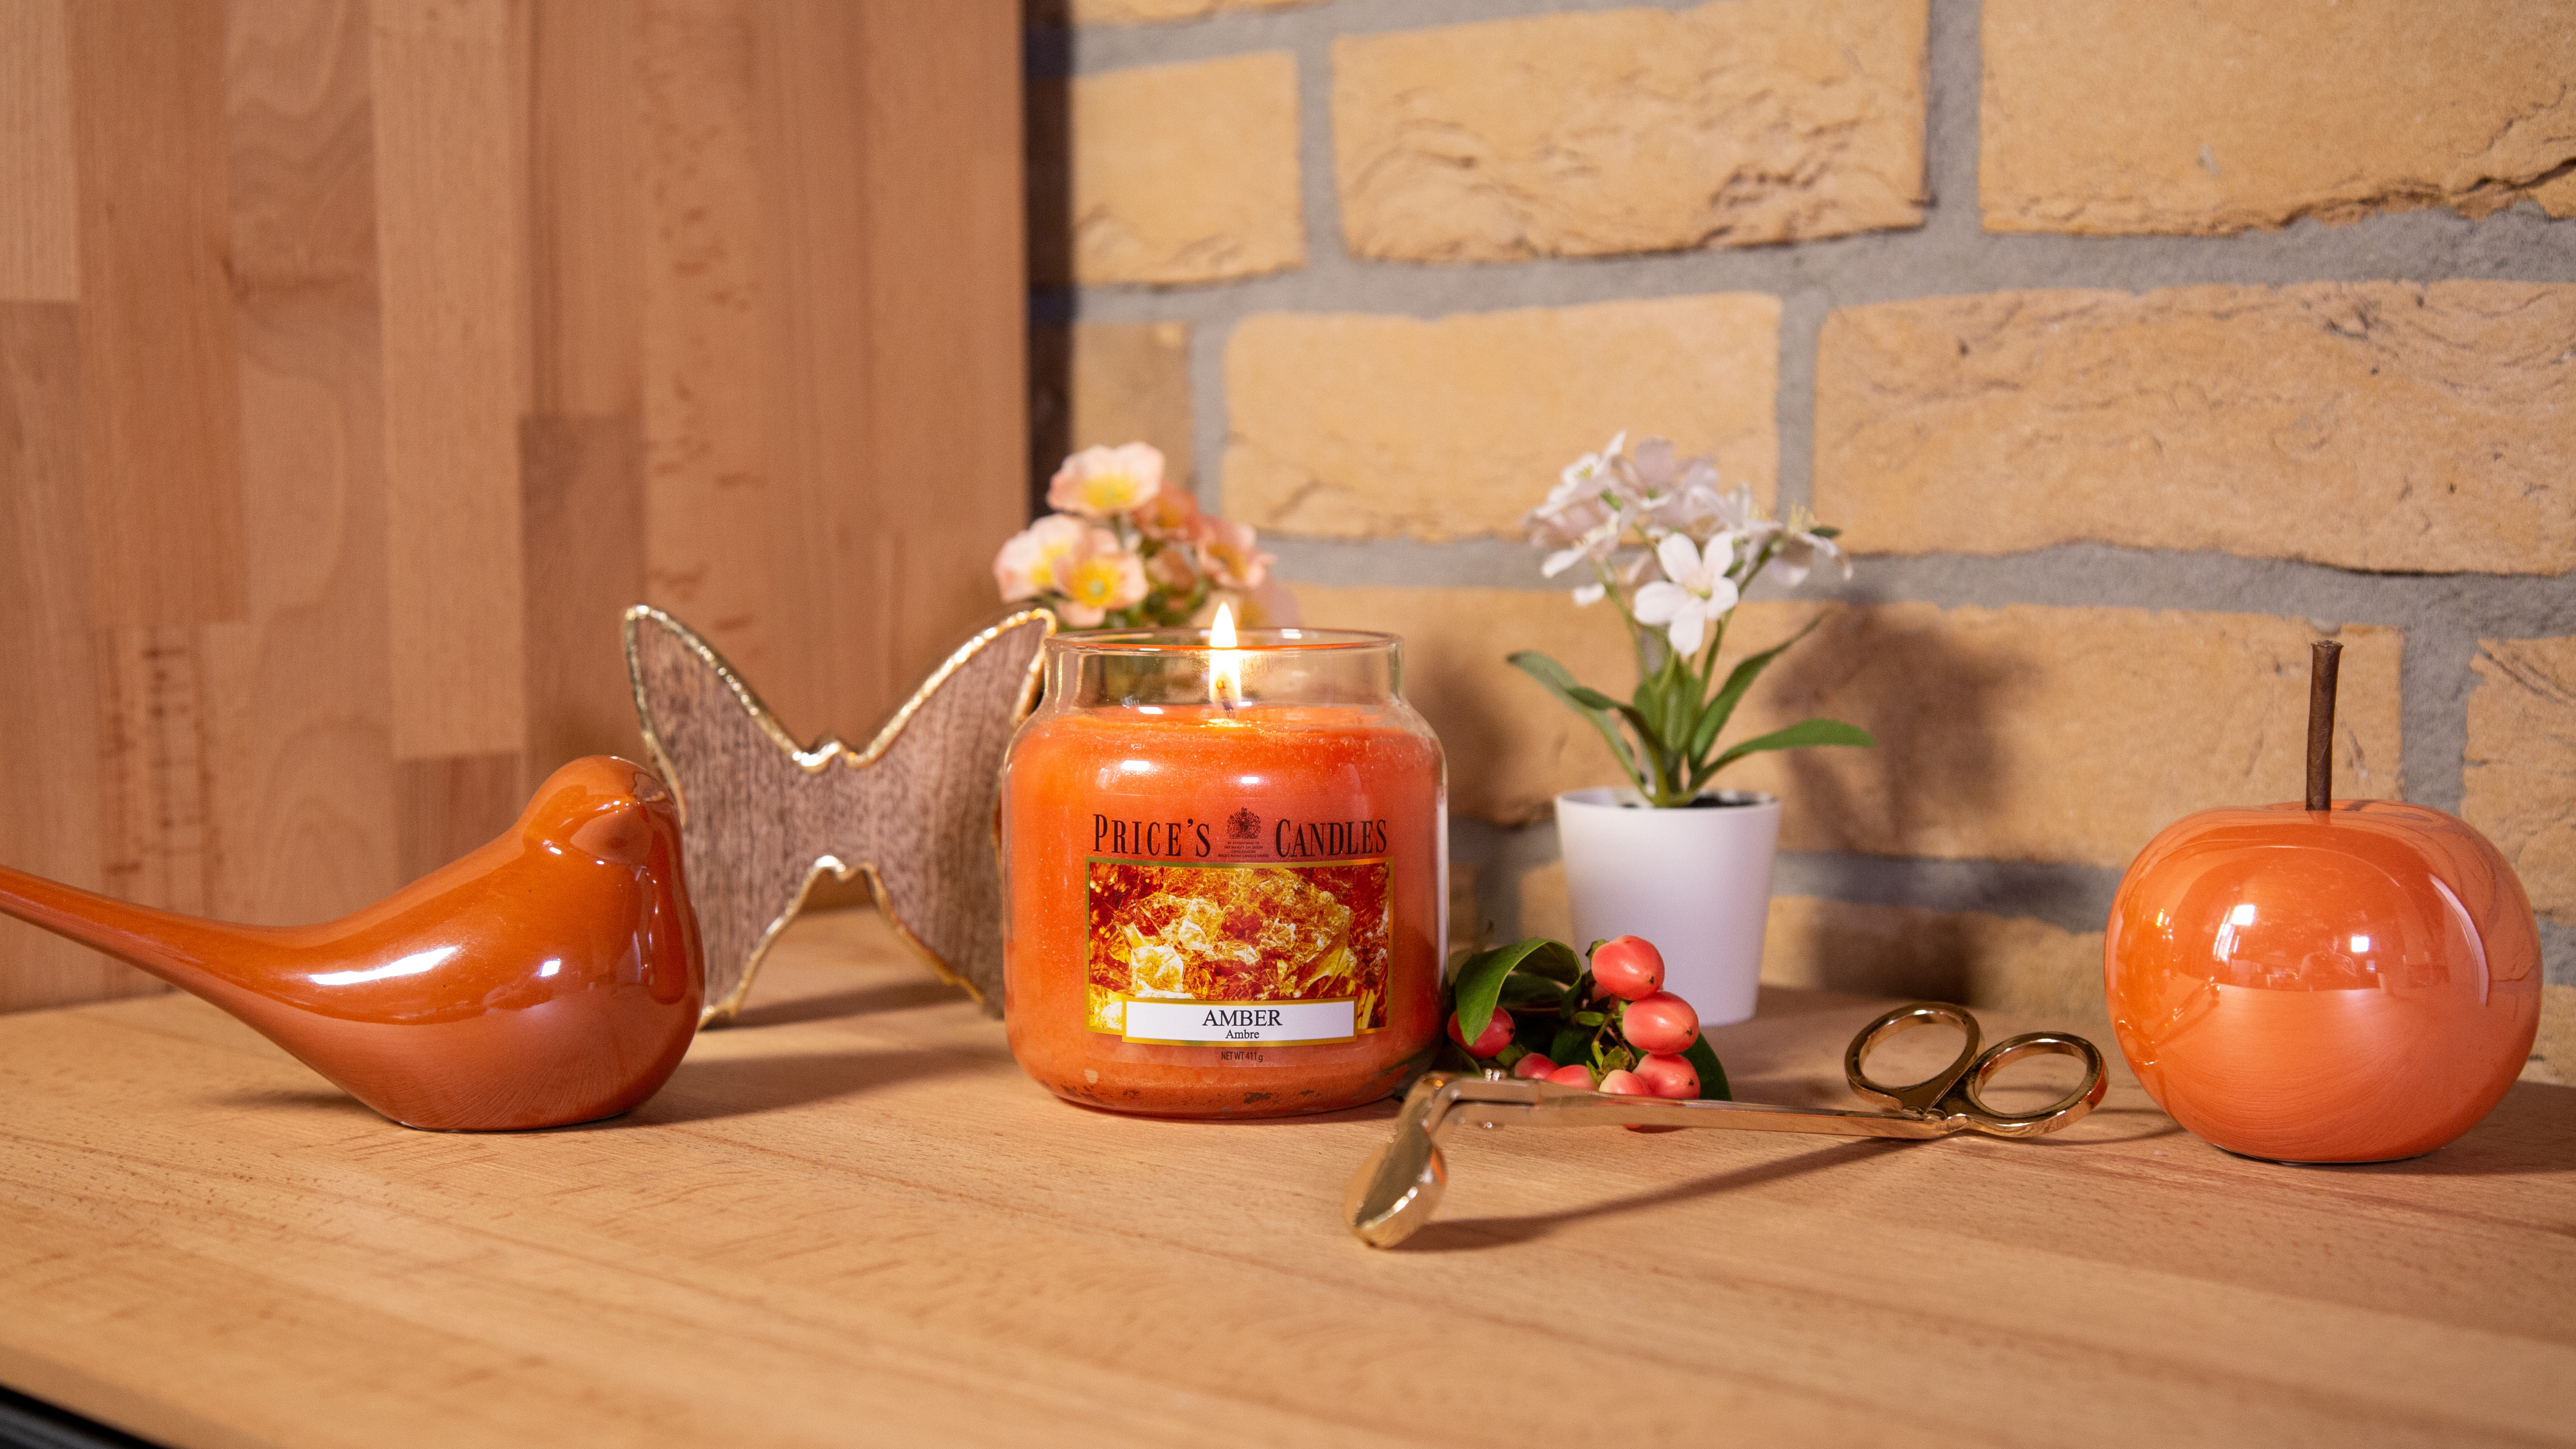 Prices Candle "Amber" 411g   